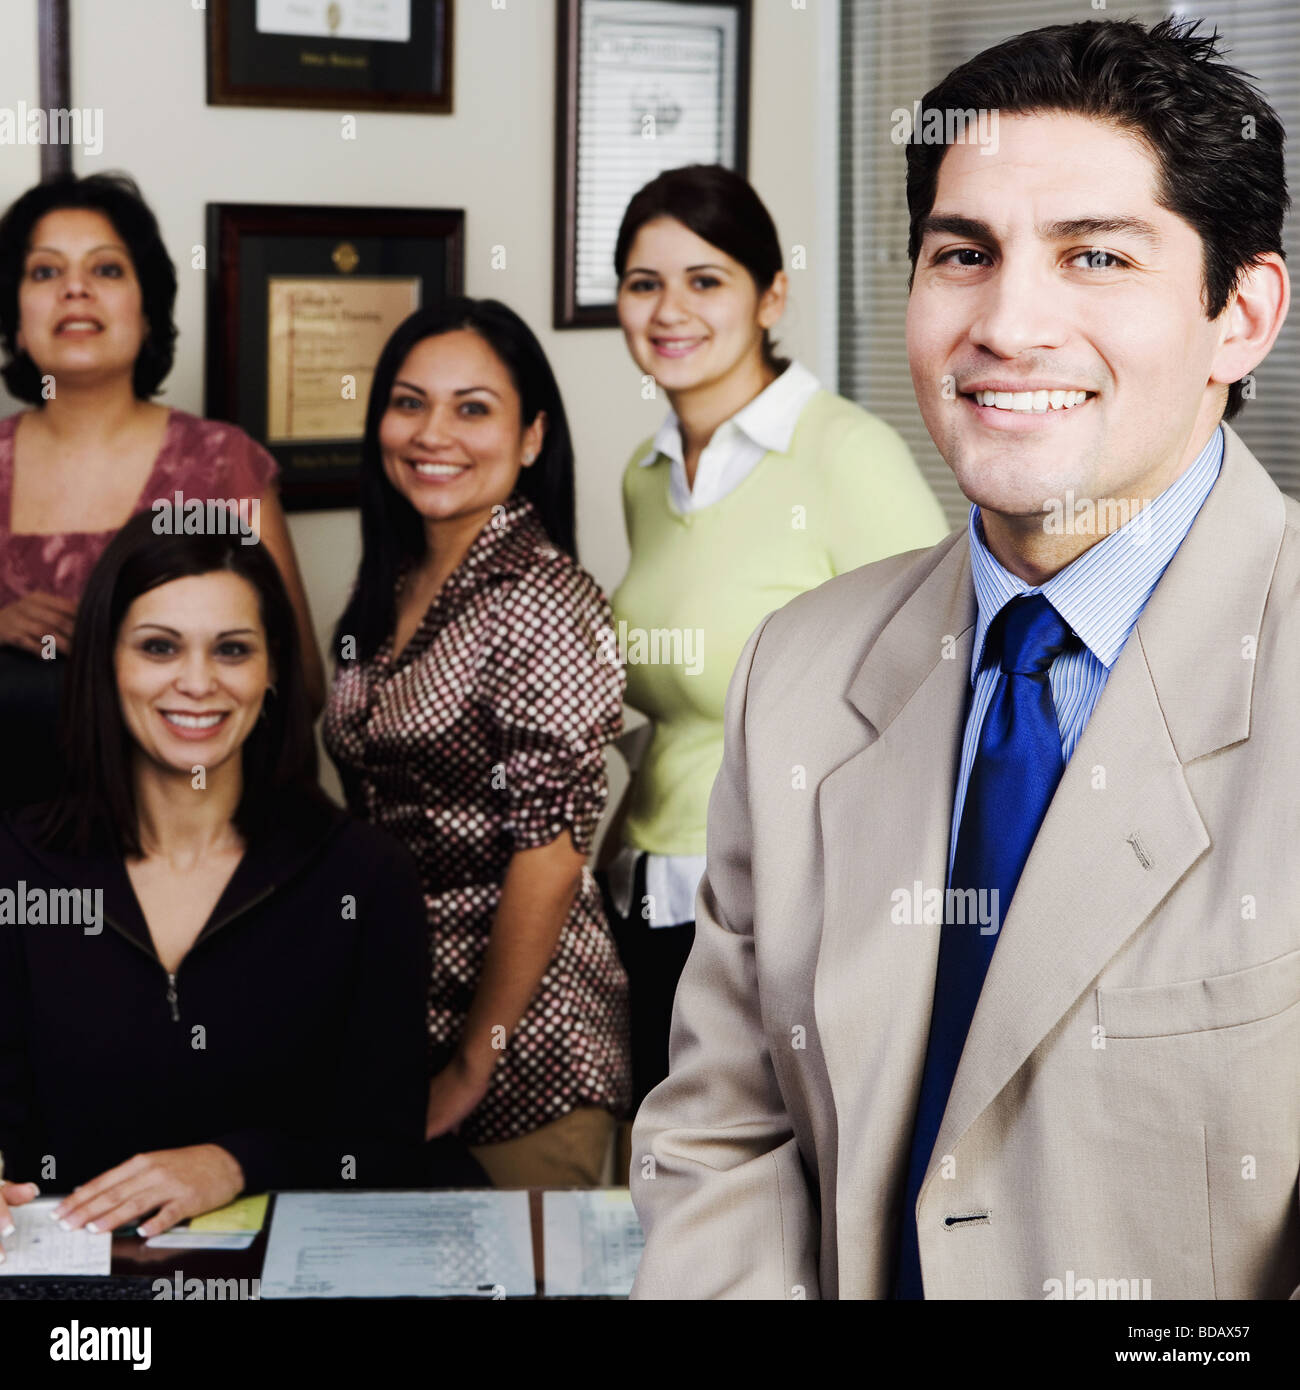 Portrait of a businessman smiling with four businesswomen in the background Stock Photo